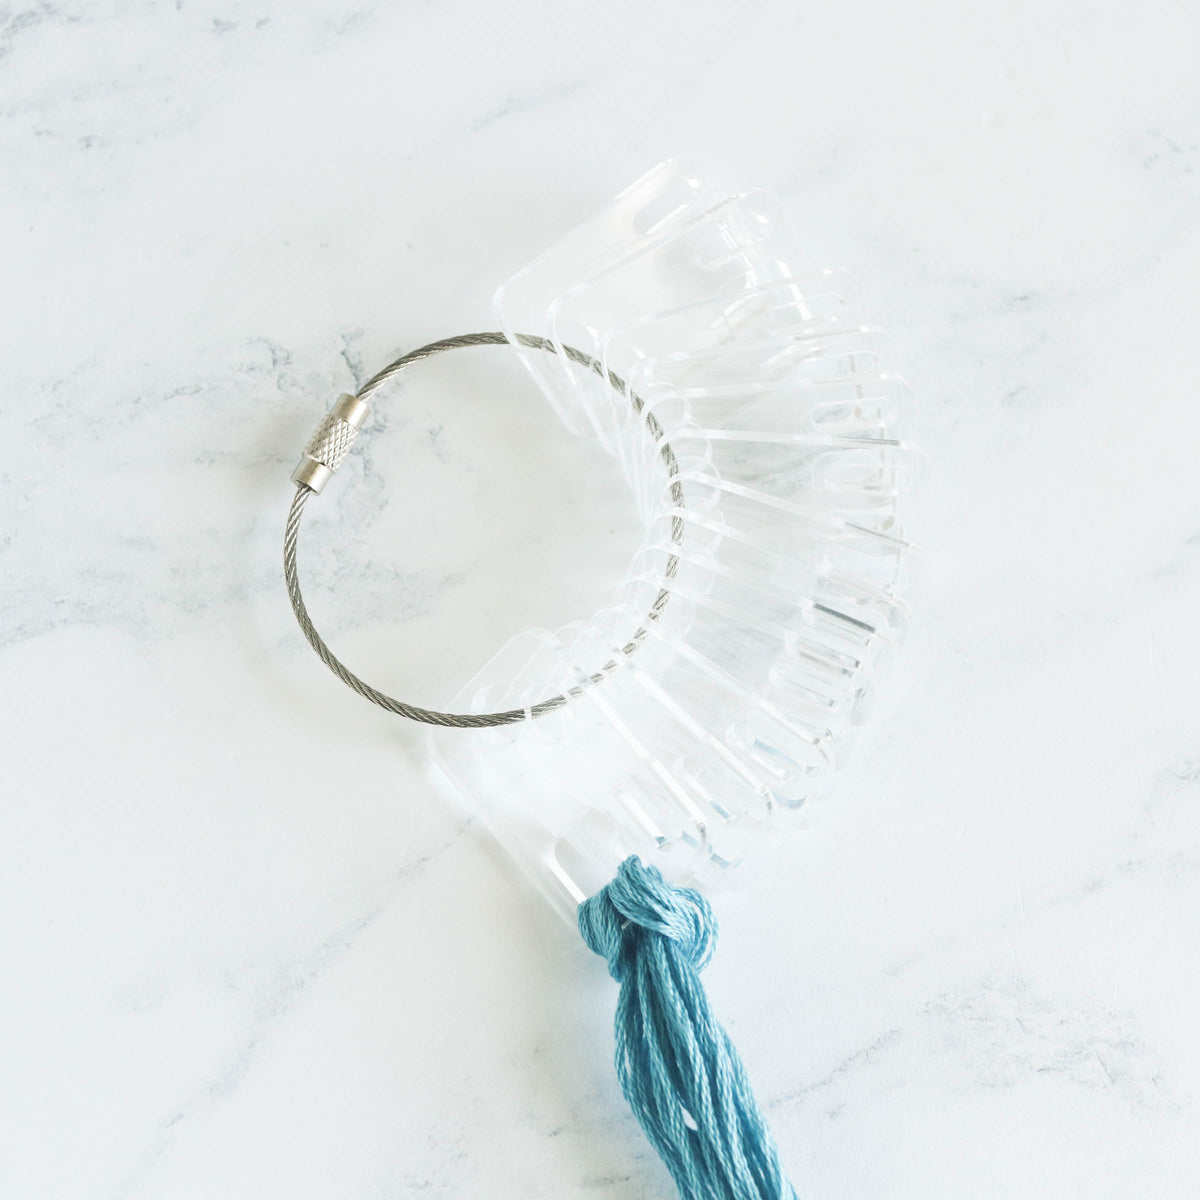 Clear Acrylic Embroidery Floss Drops - Stitched Modern